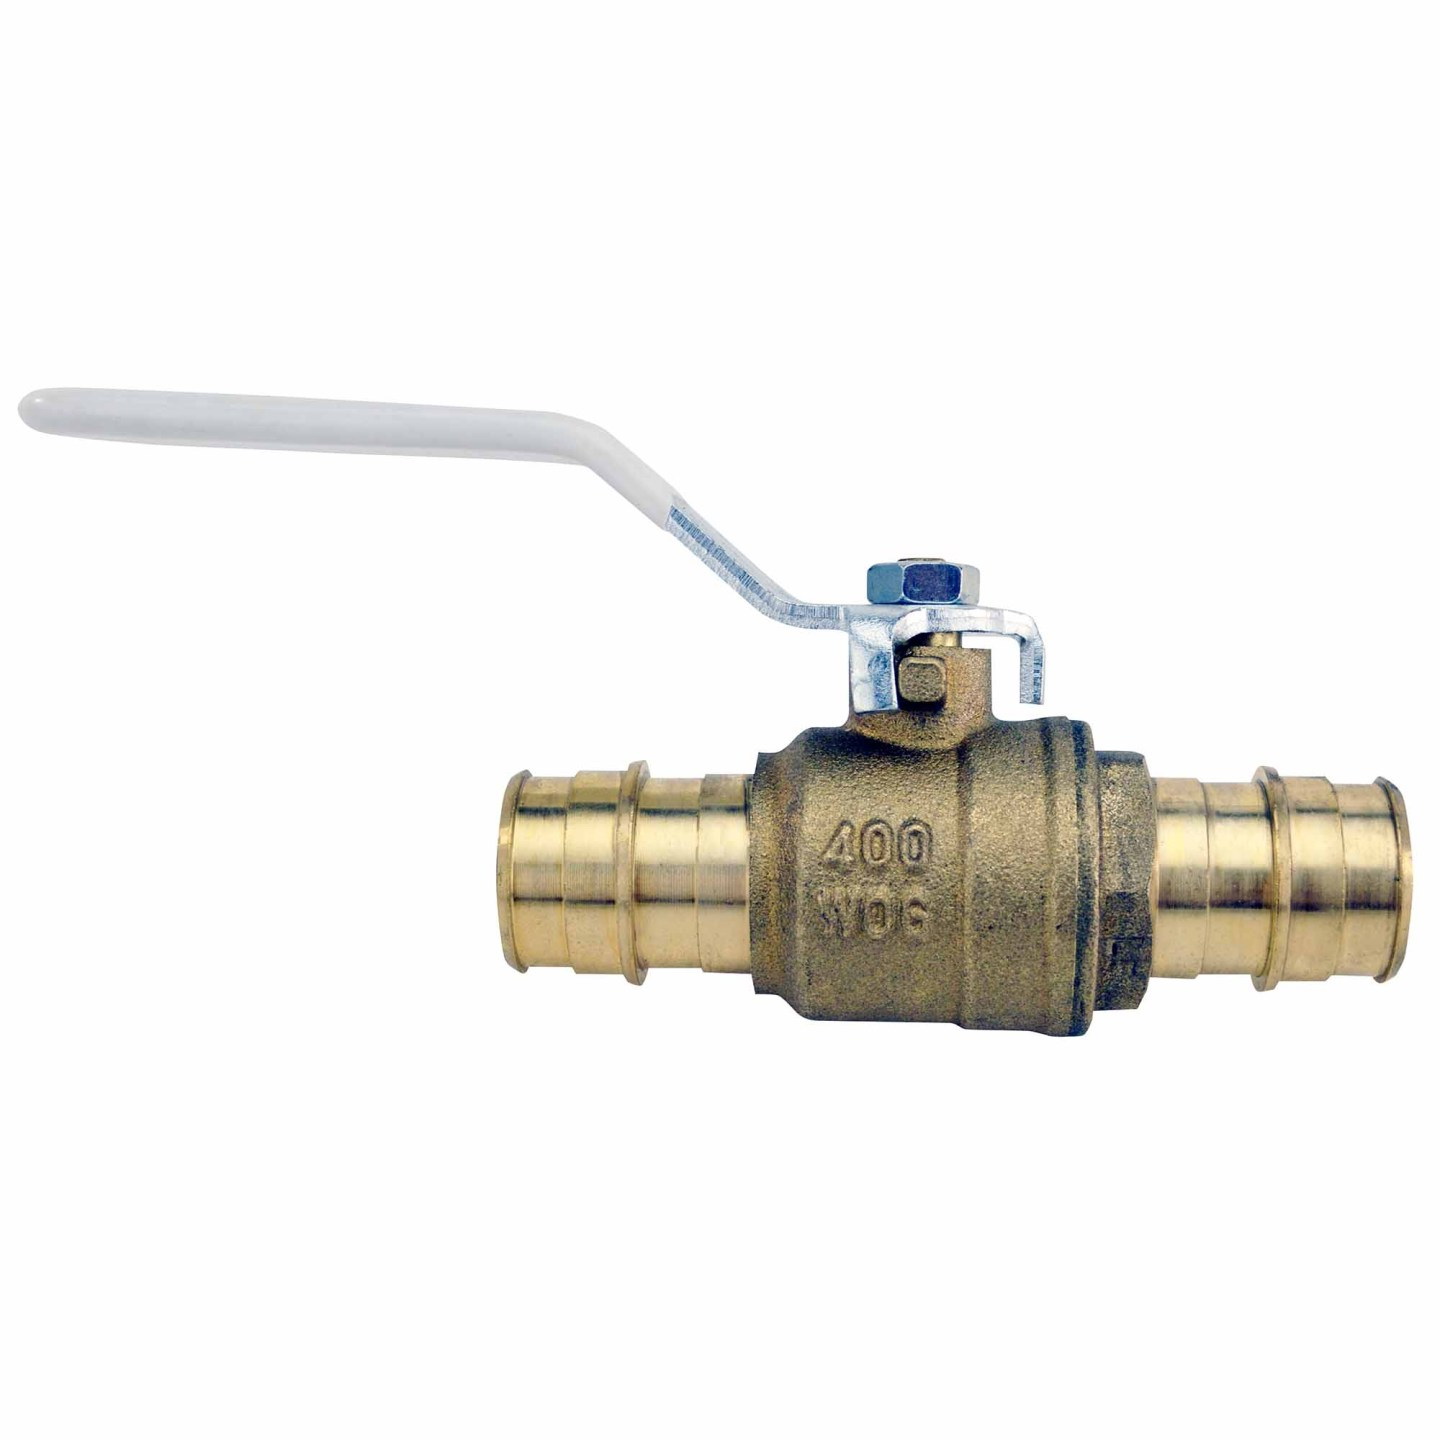 EPXV34 Ball Valve, 3/4 in Connection, Barb, 200 psi Pressure, Quarter-Turn Actuator, Brass Body